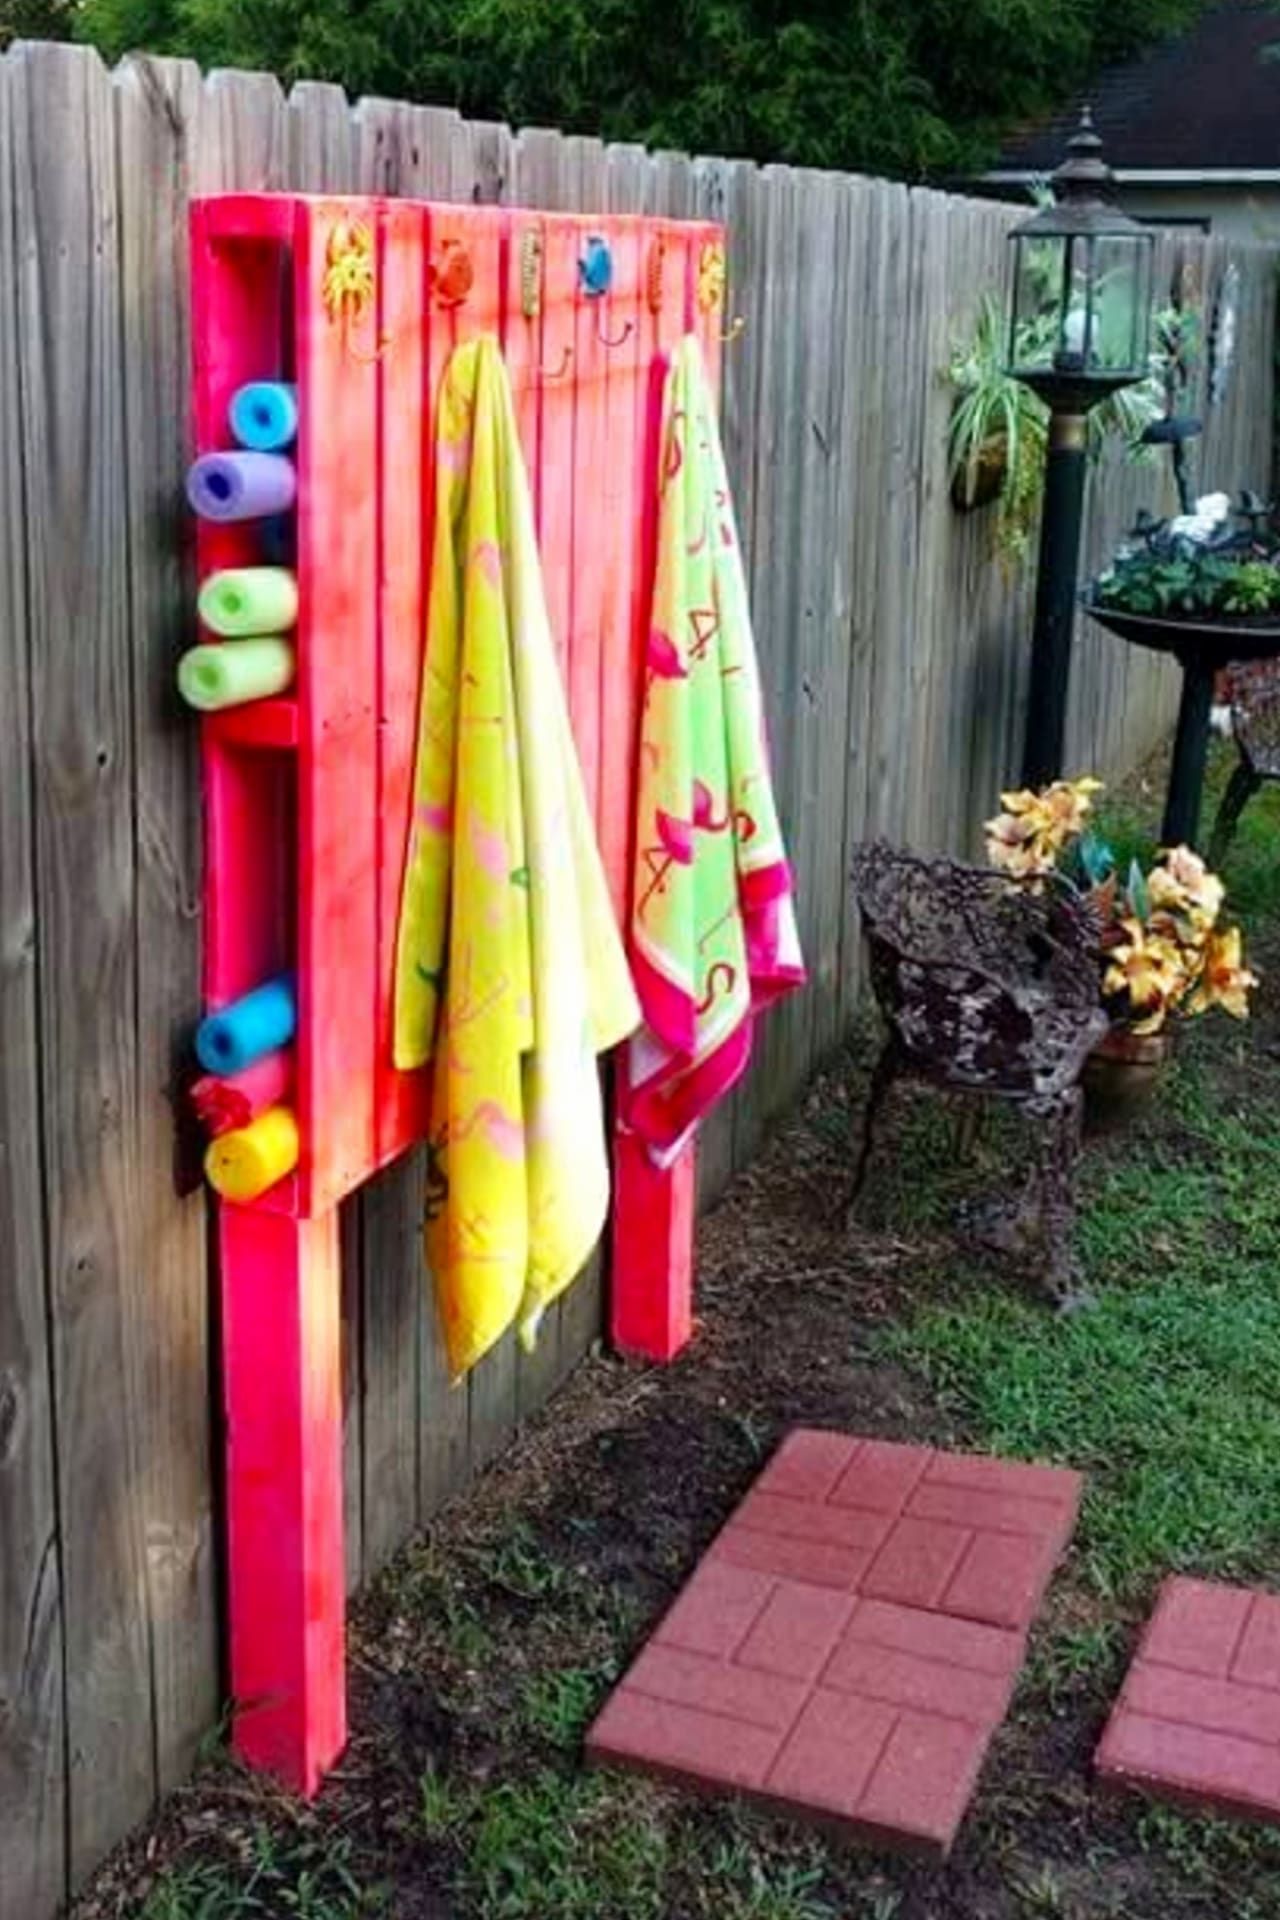 Pallet Projects - 19+ Clever, Crafty and Easy DIY Pallet Ideas -   19 diy projects Creative cool ideas